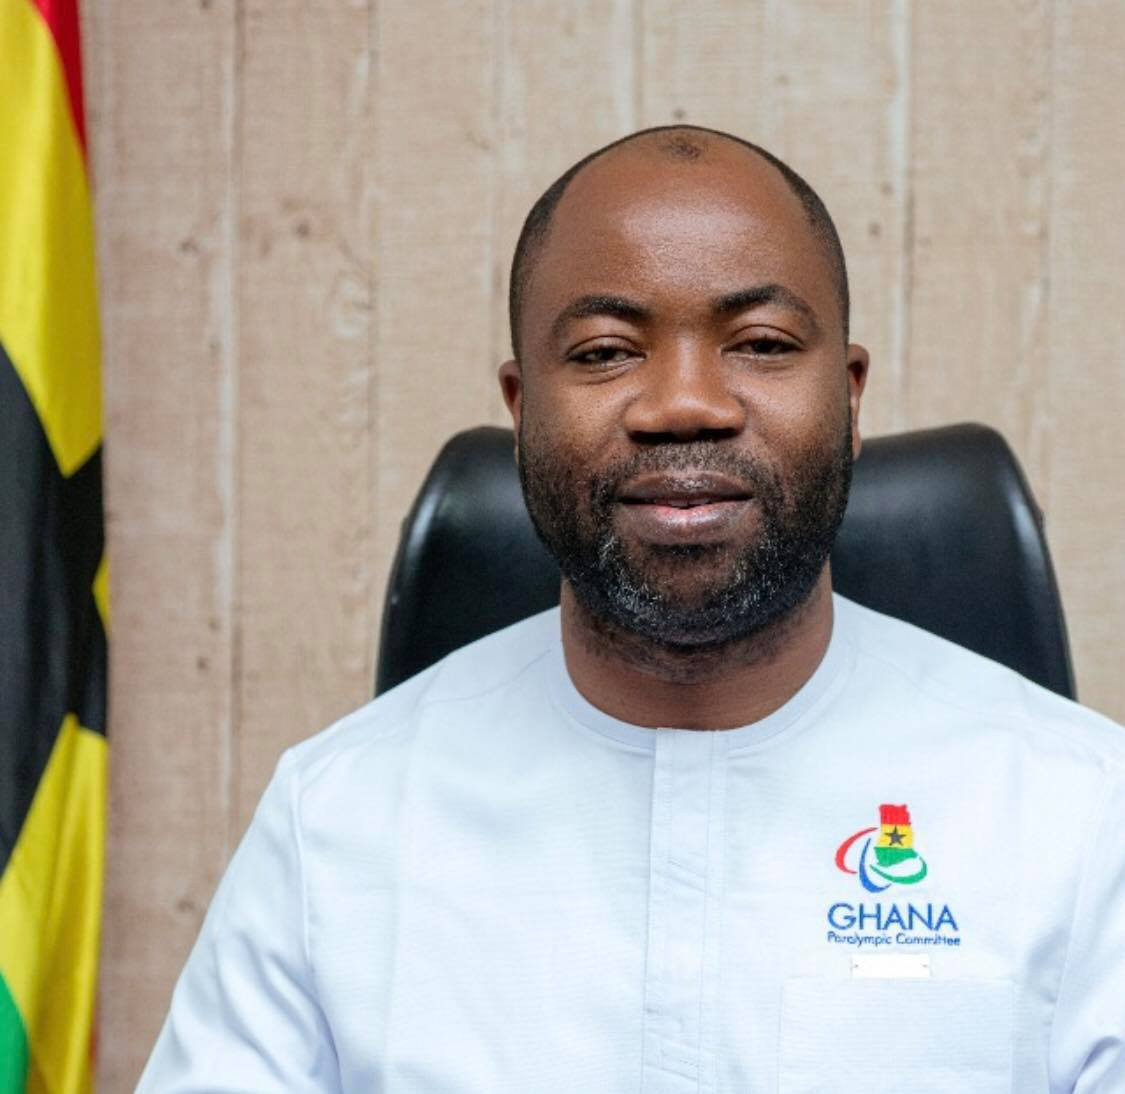 Ghana's Samson Deen received 24 of the votes cast as he was elected as President of the African Paralympic Committee ©NPC Ghana